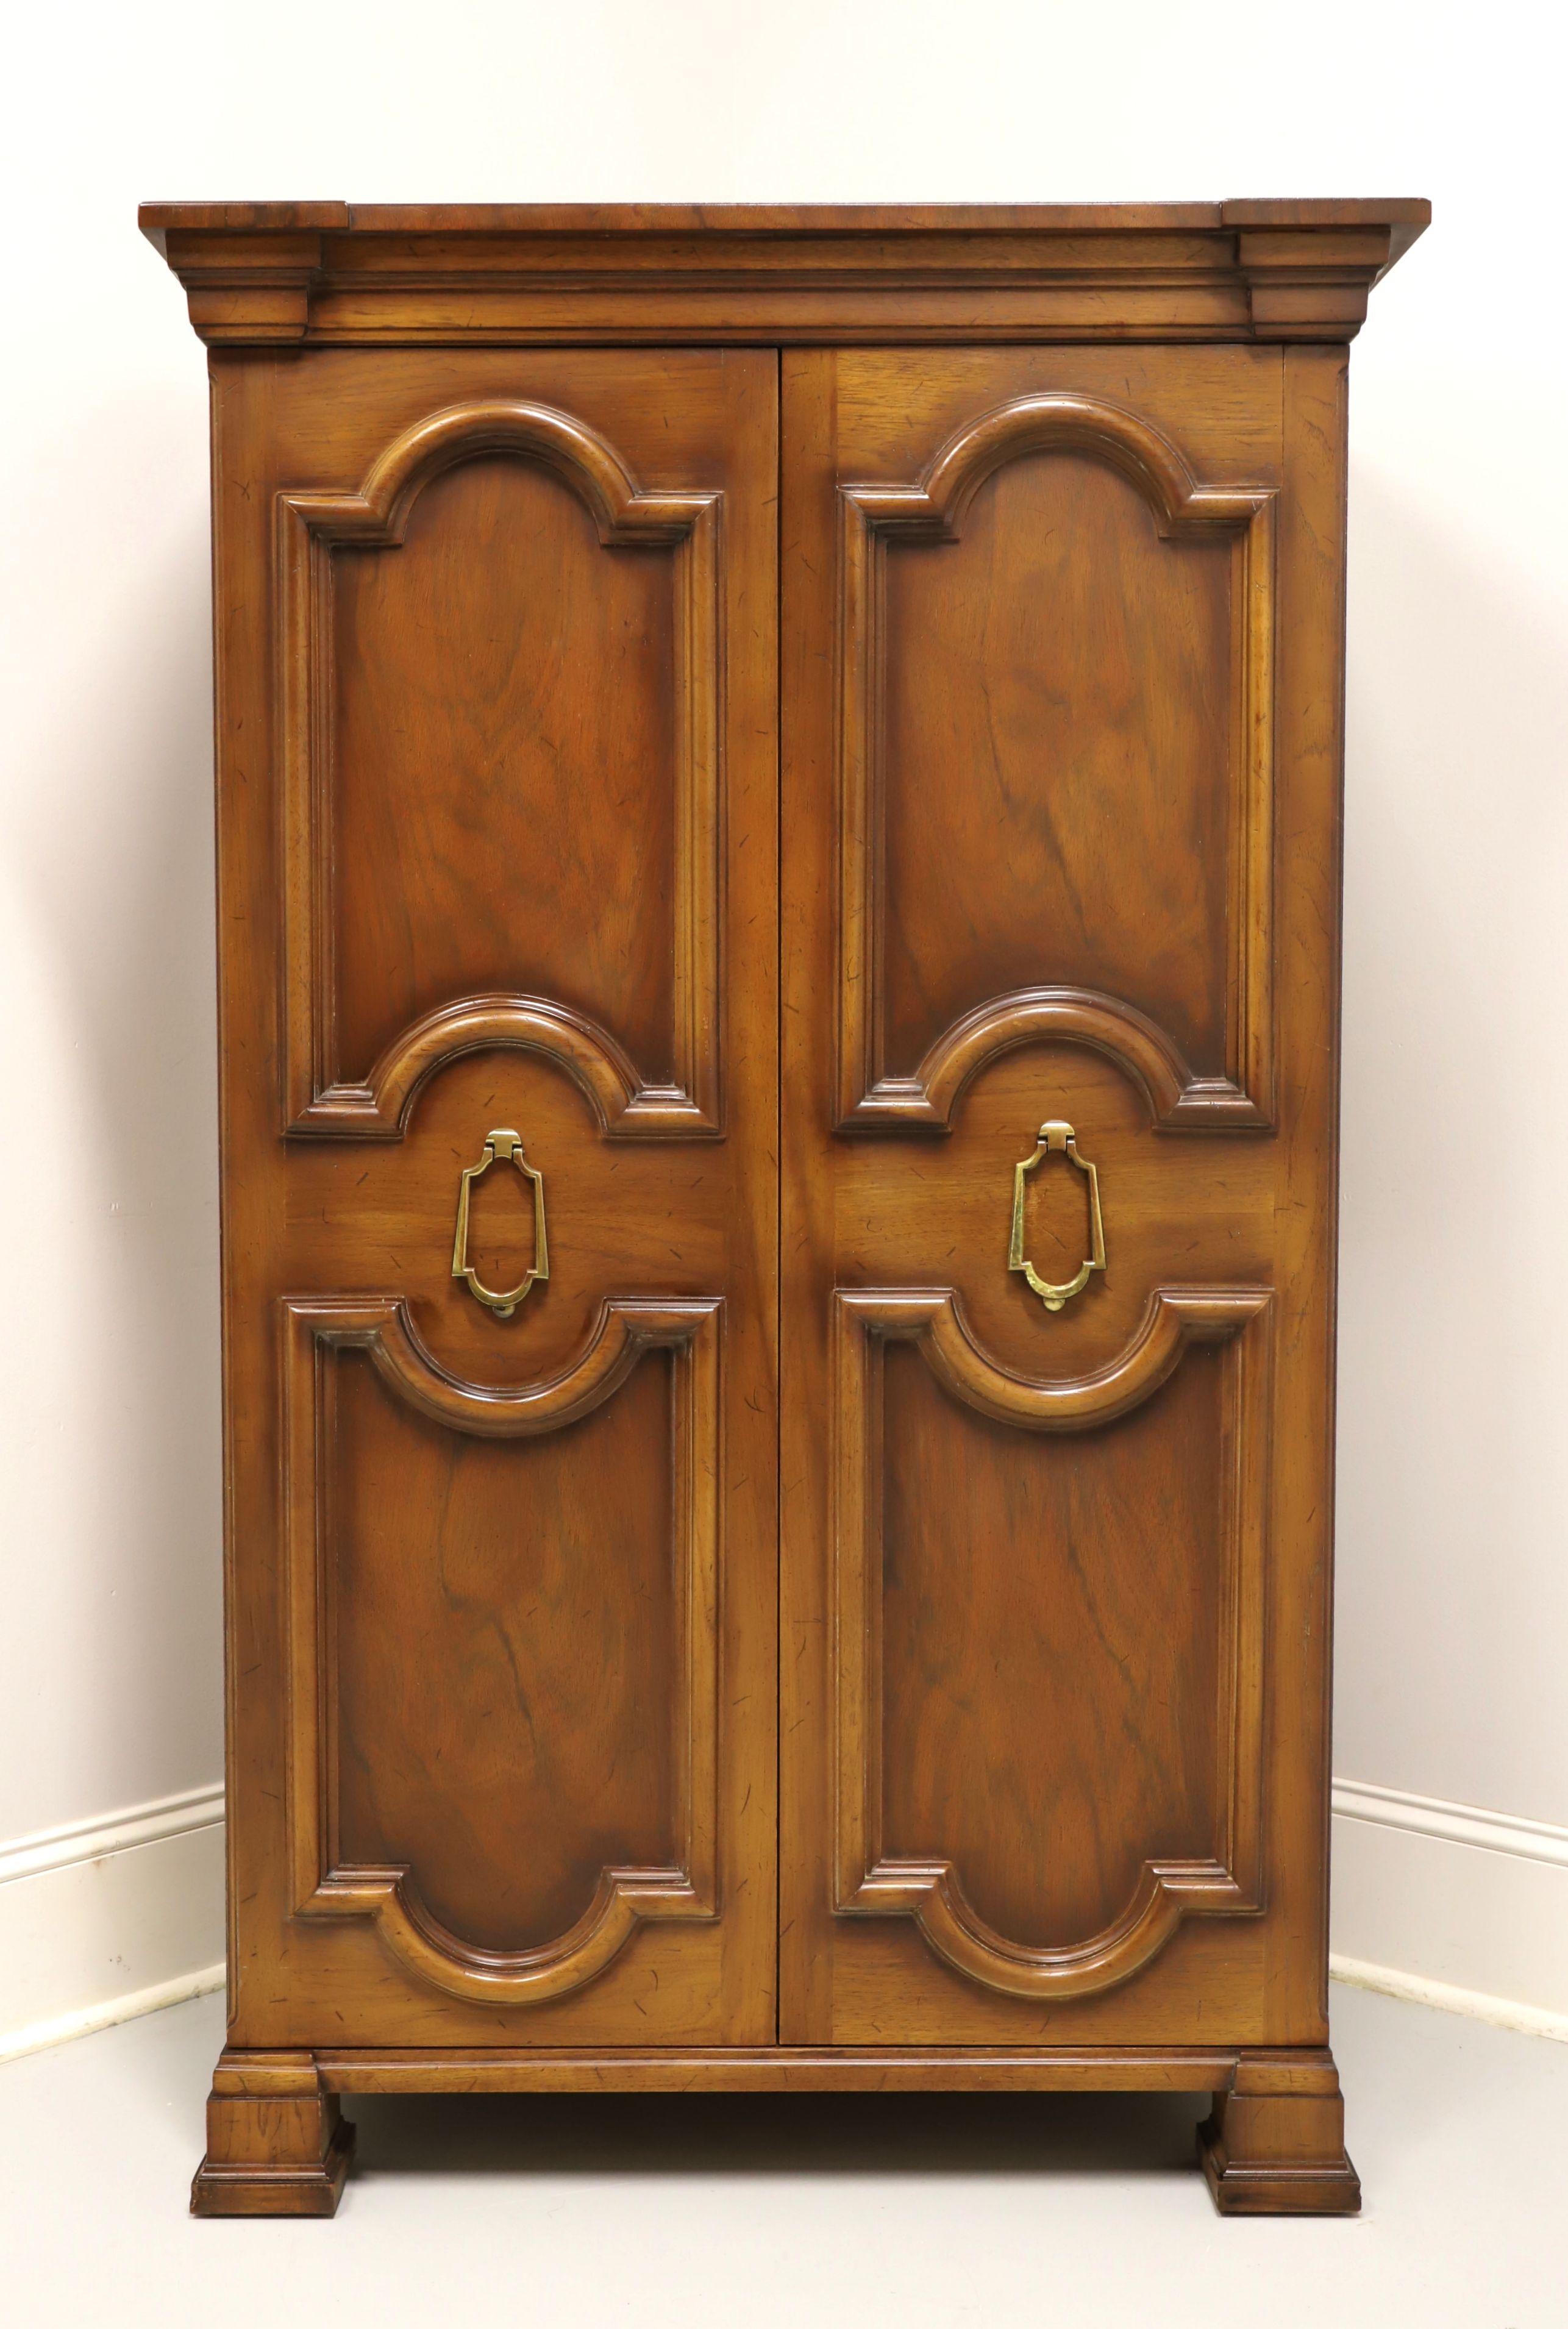 A Hollywood Regency style gentleman's chest by Tomlinson Furniture. Walnut with their slightly distressed Nutmeg finish, raised panel doors, brass hardware and block feet. Features decoratively carved double doors revealing an interior of three